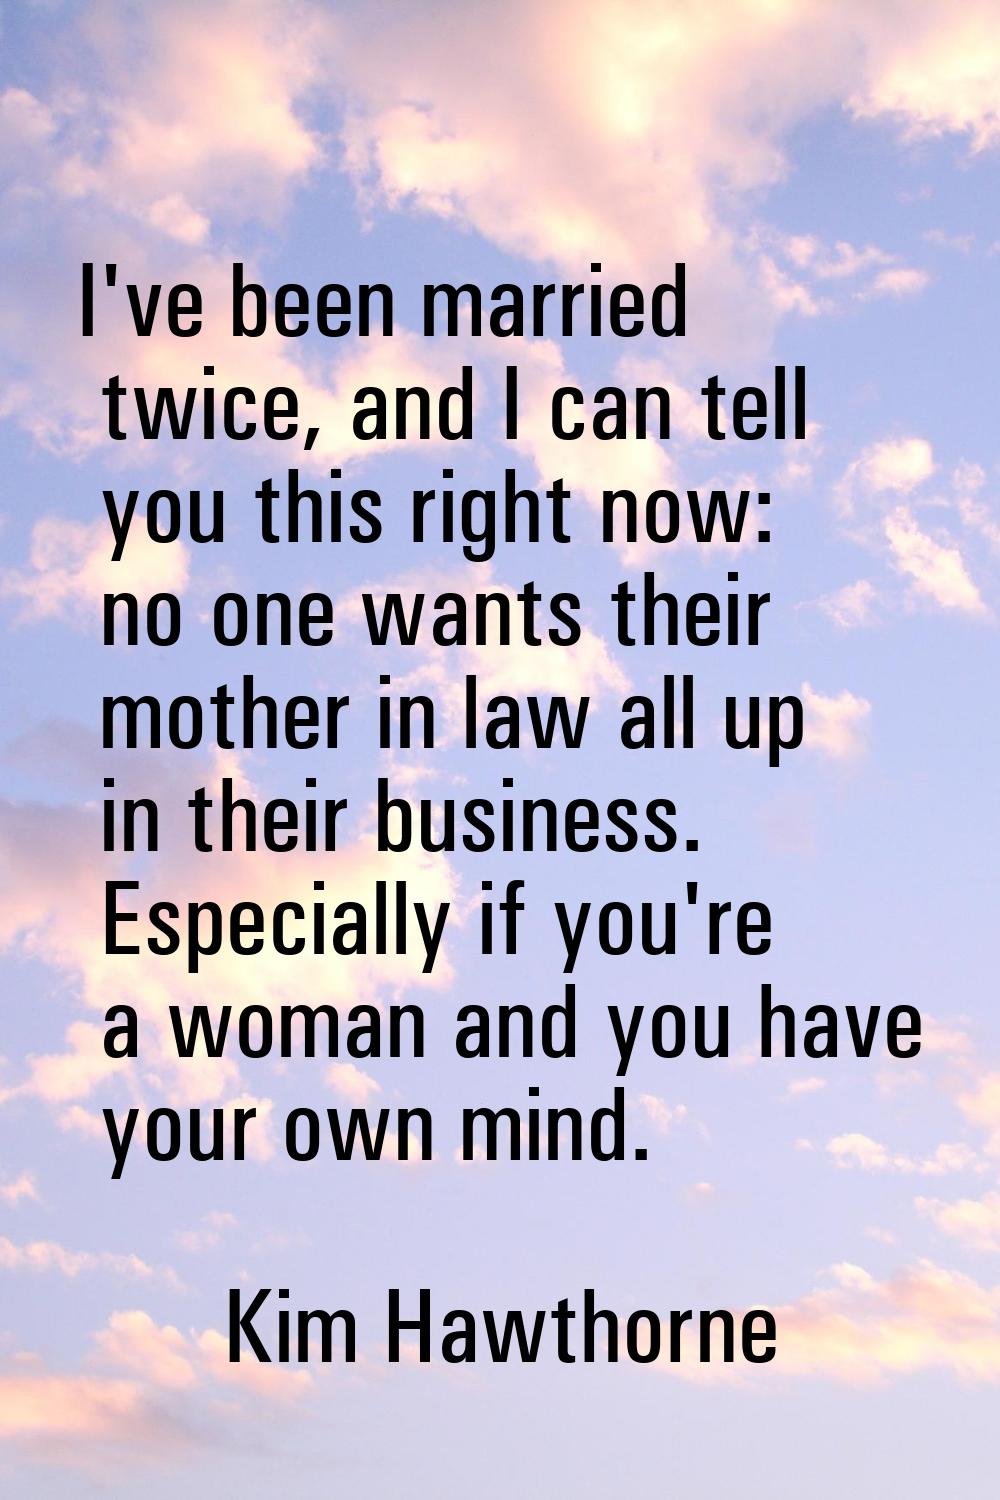 I've been married twice, and I can tell you this right now: no one wants their mother in law all up